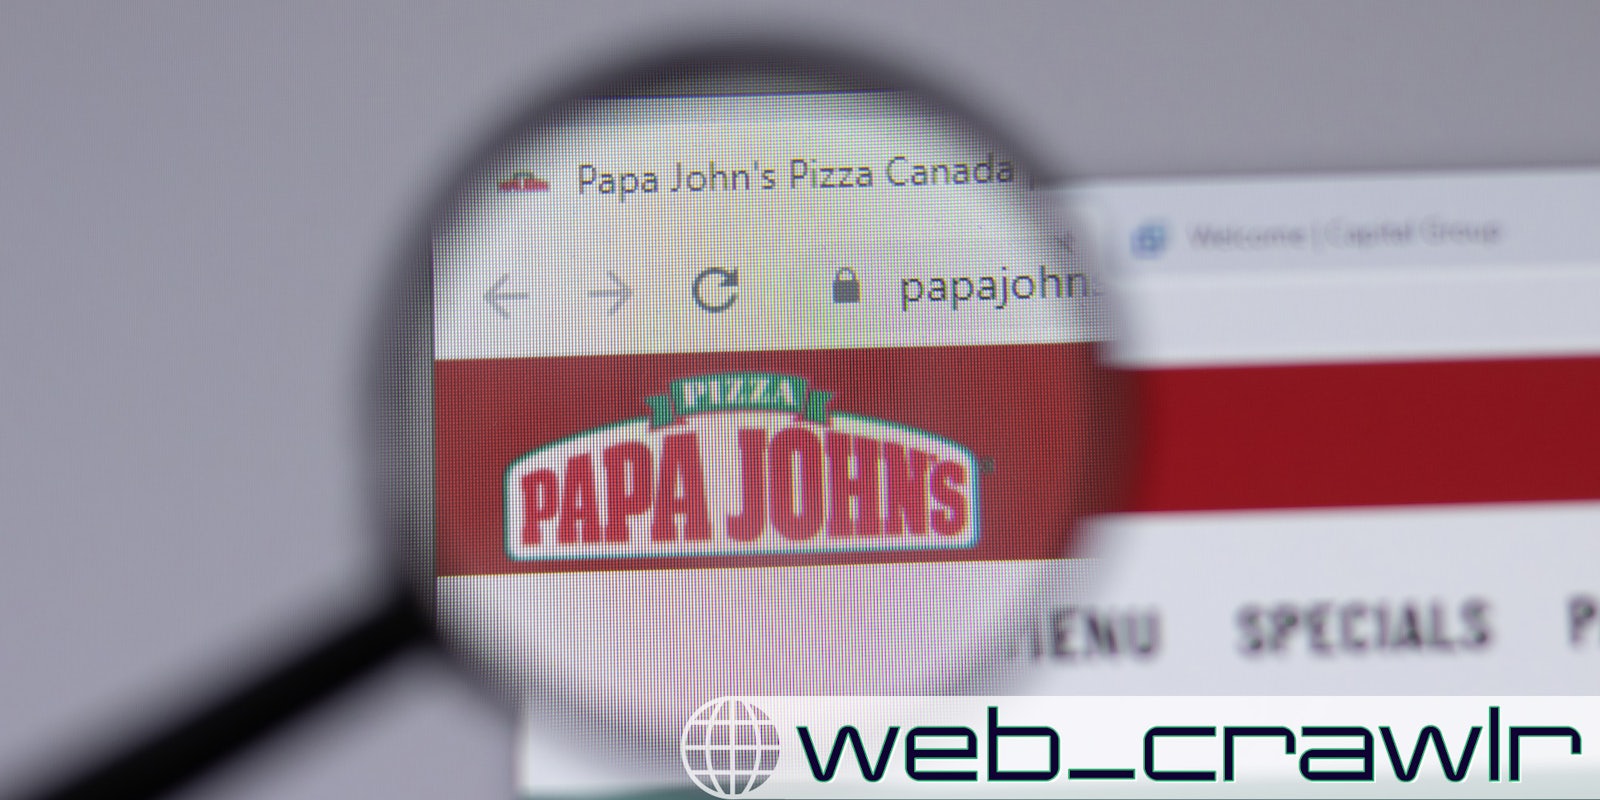 A magnifying glass hovering over the Papa John's logo on a website. The Daily Dot newsletter web_crawlr logo is in the bottom right corner.